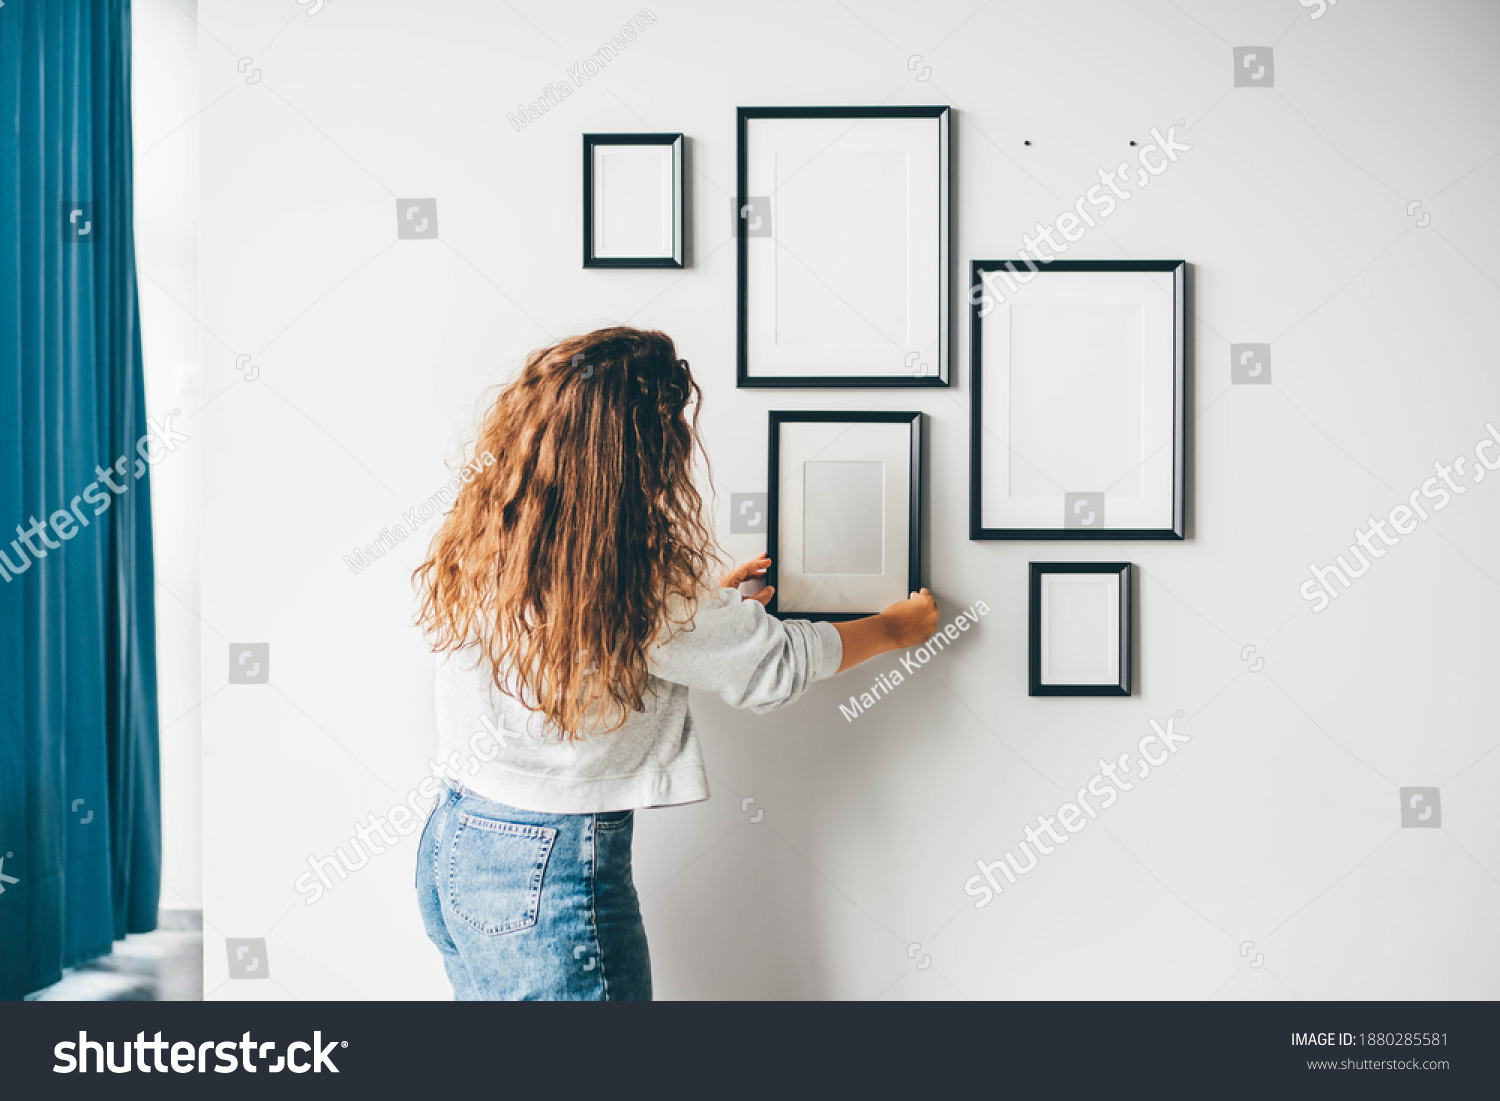 Woman hanging a frame on a wall. #1880285581